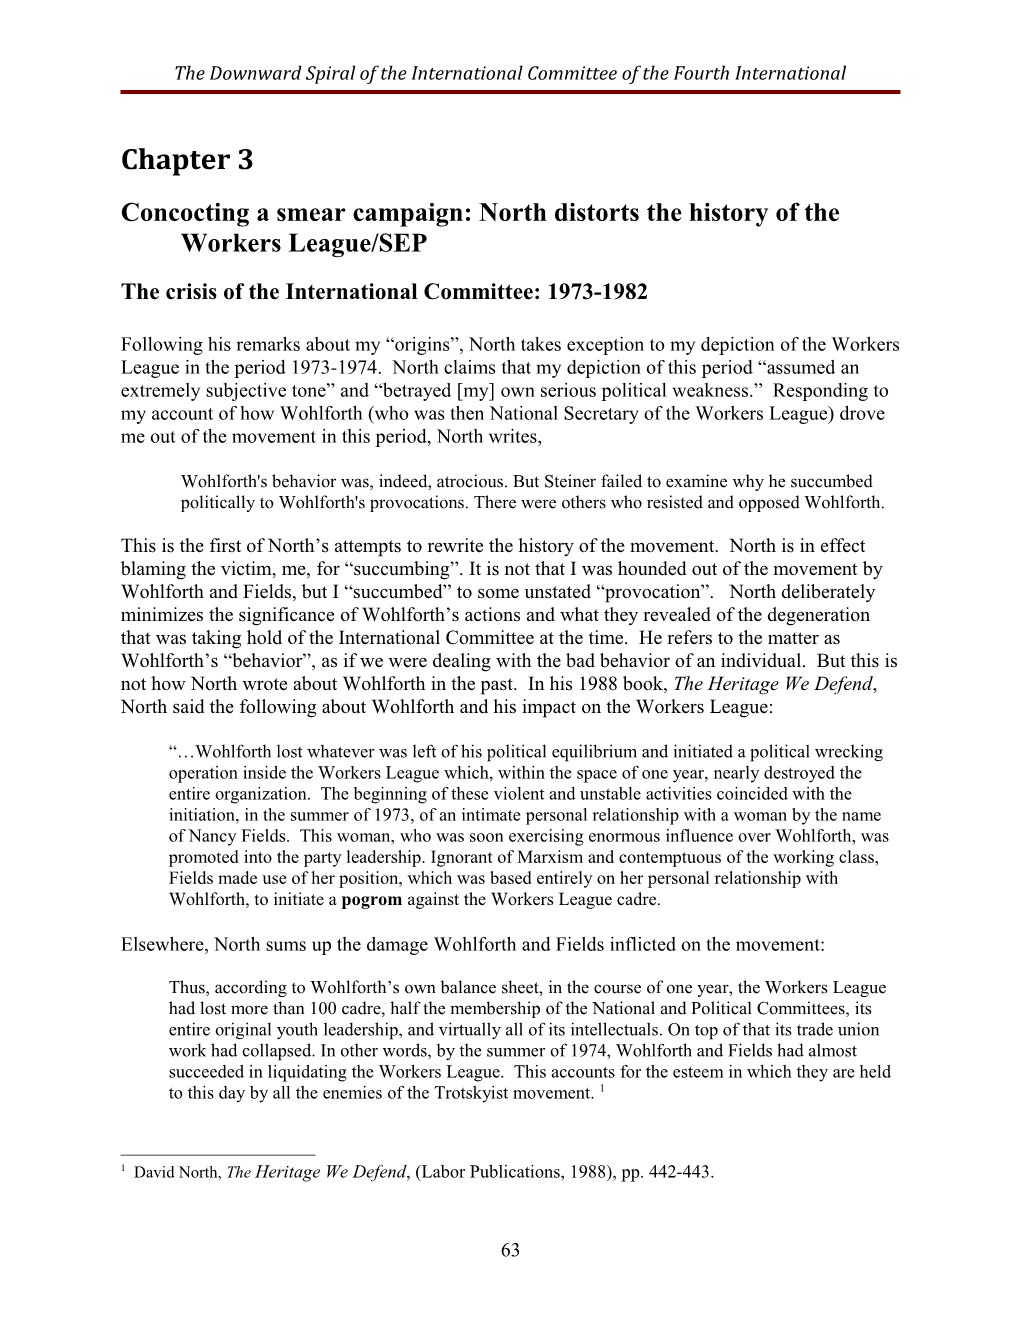 North Distorts the History of the Workers League/SEP